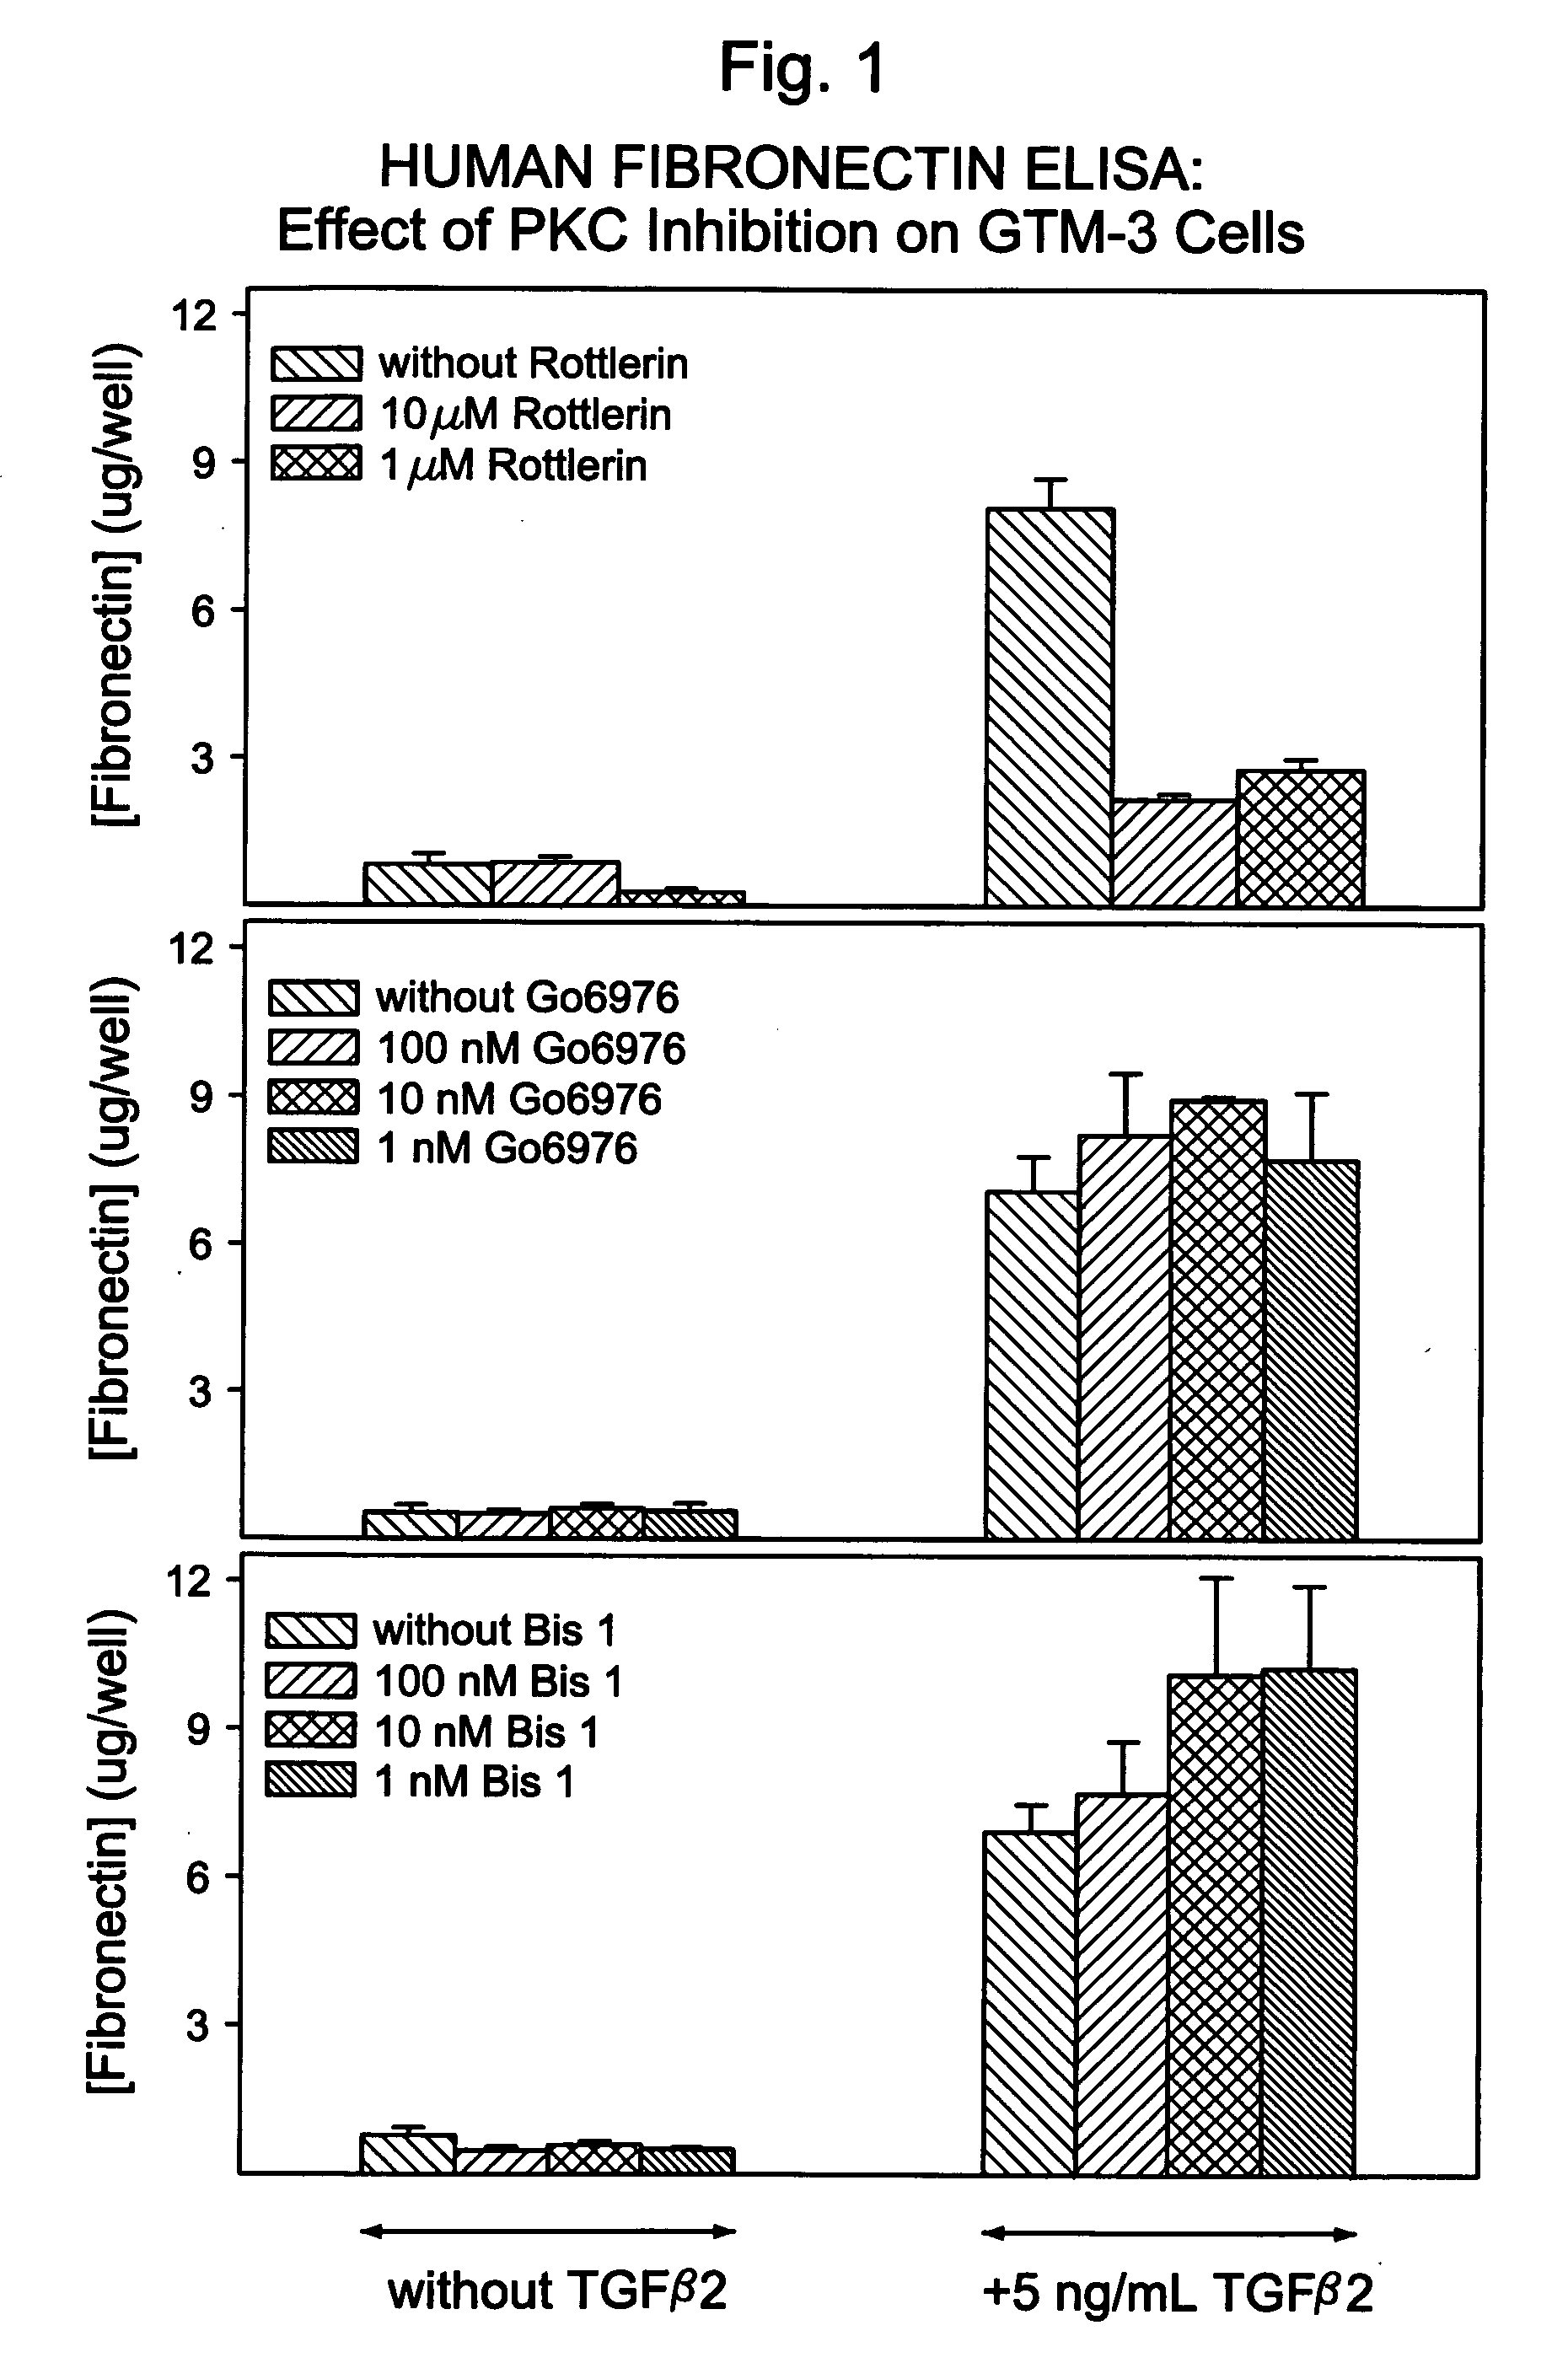 Inhibitors of protein kinase c-delta for the treatment of glaucoma